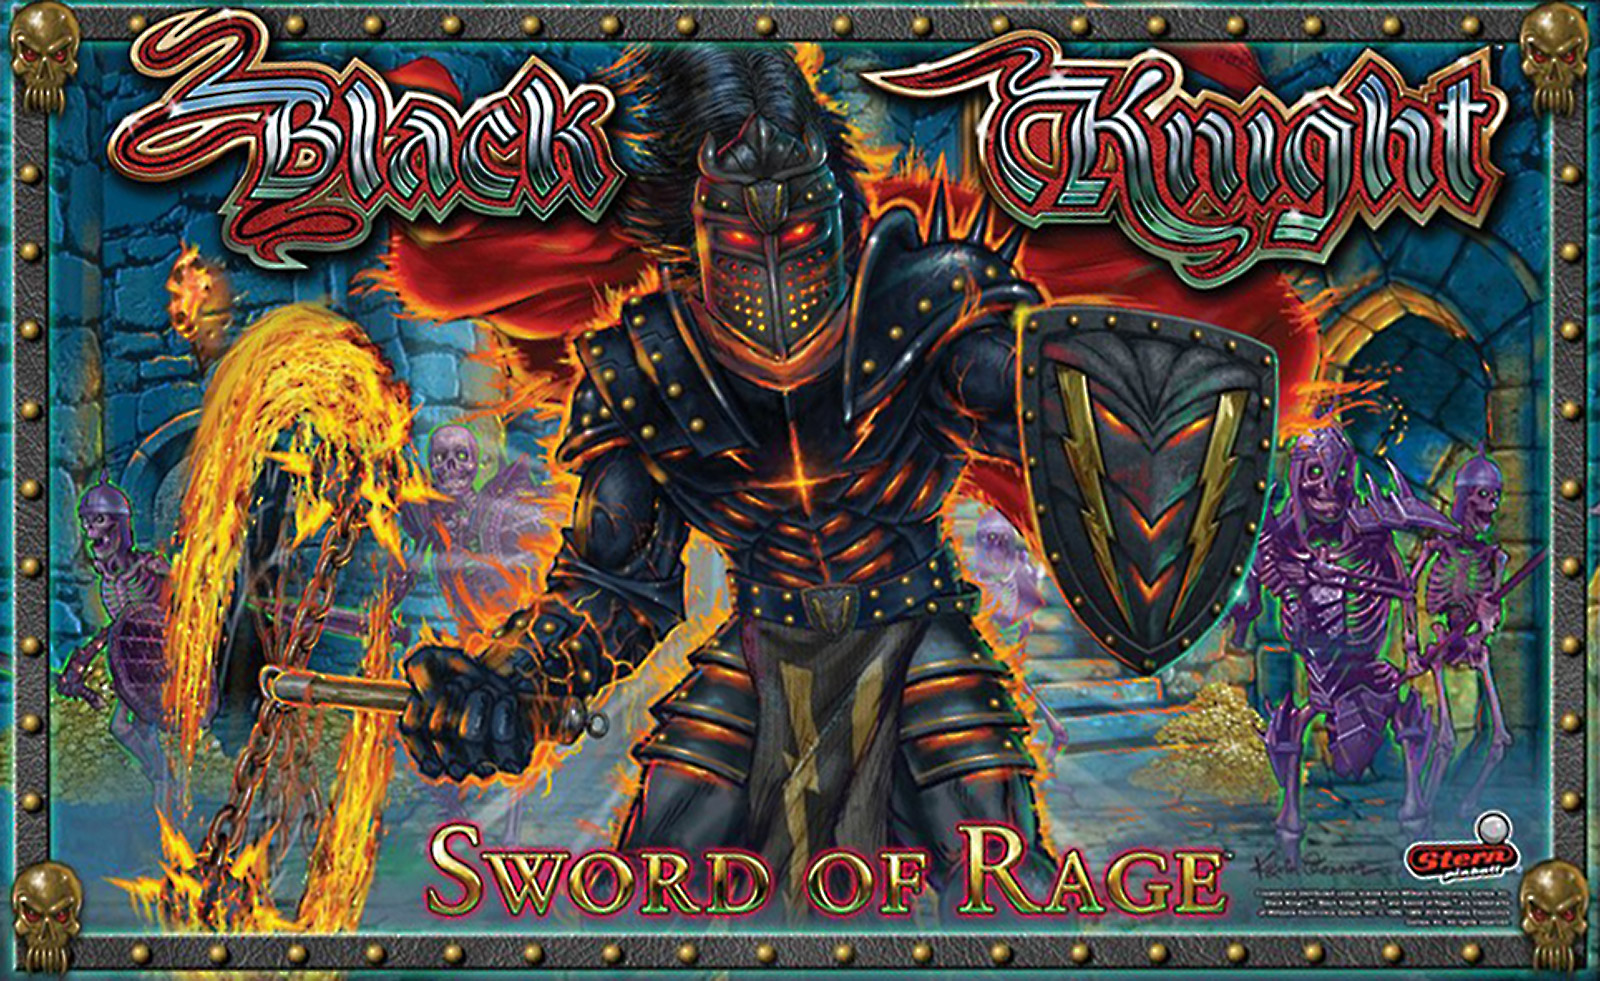 Black Knight Sword of Rage (Pro) with PinSound upgrades